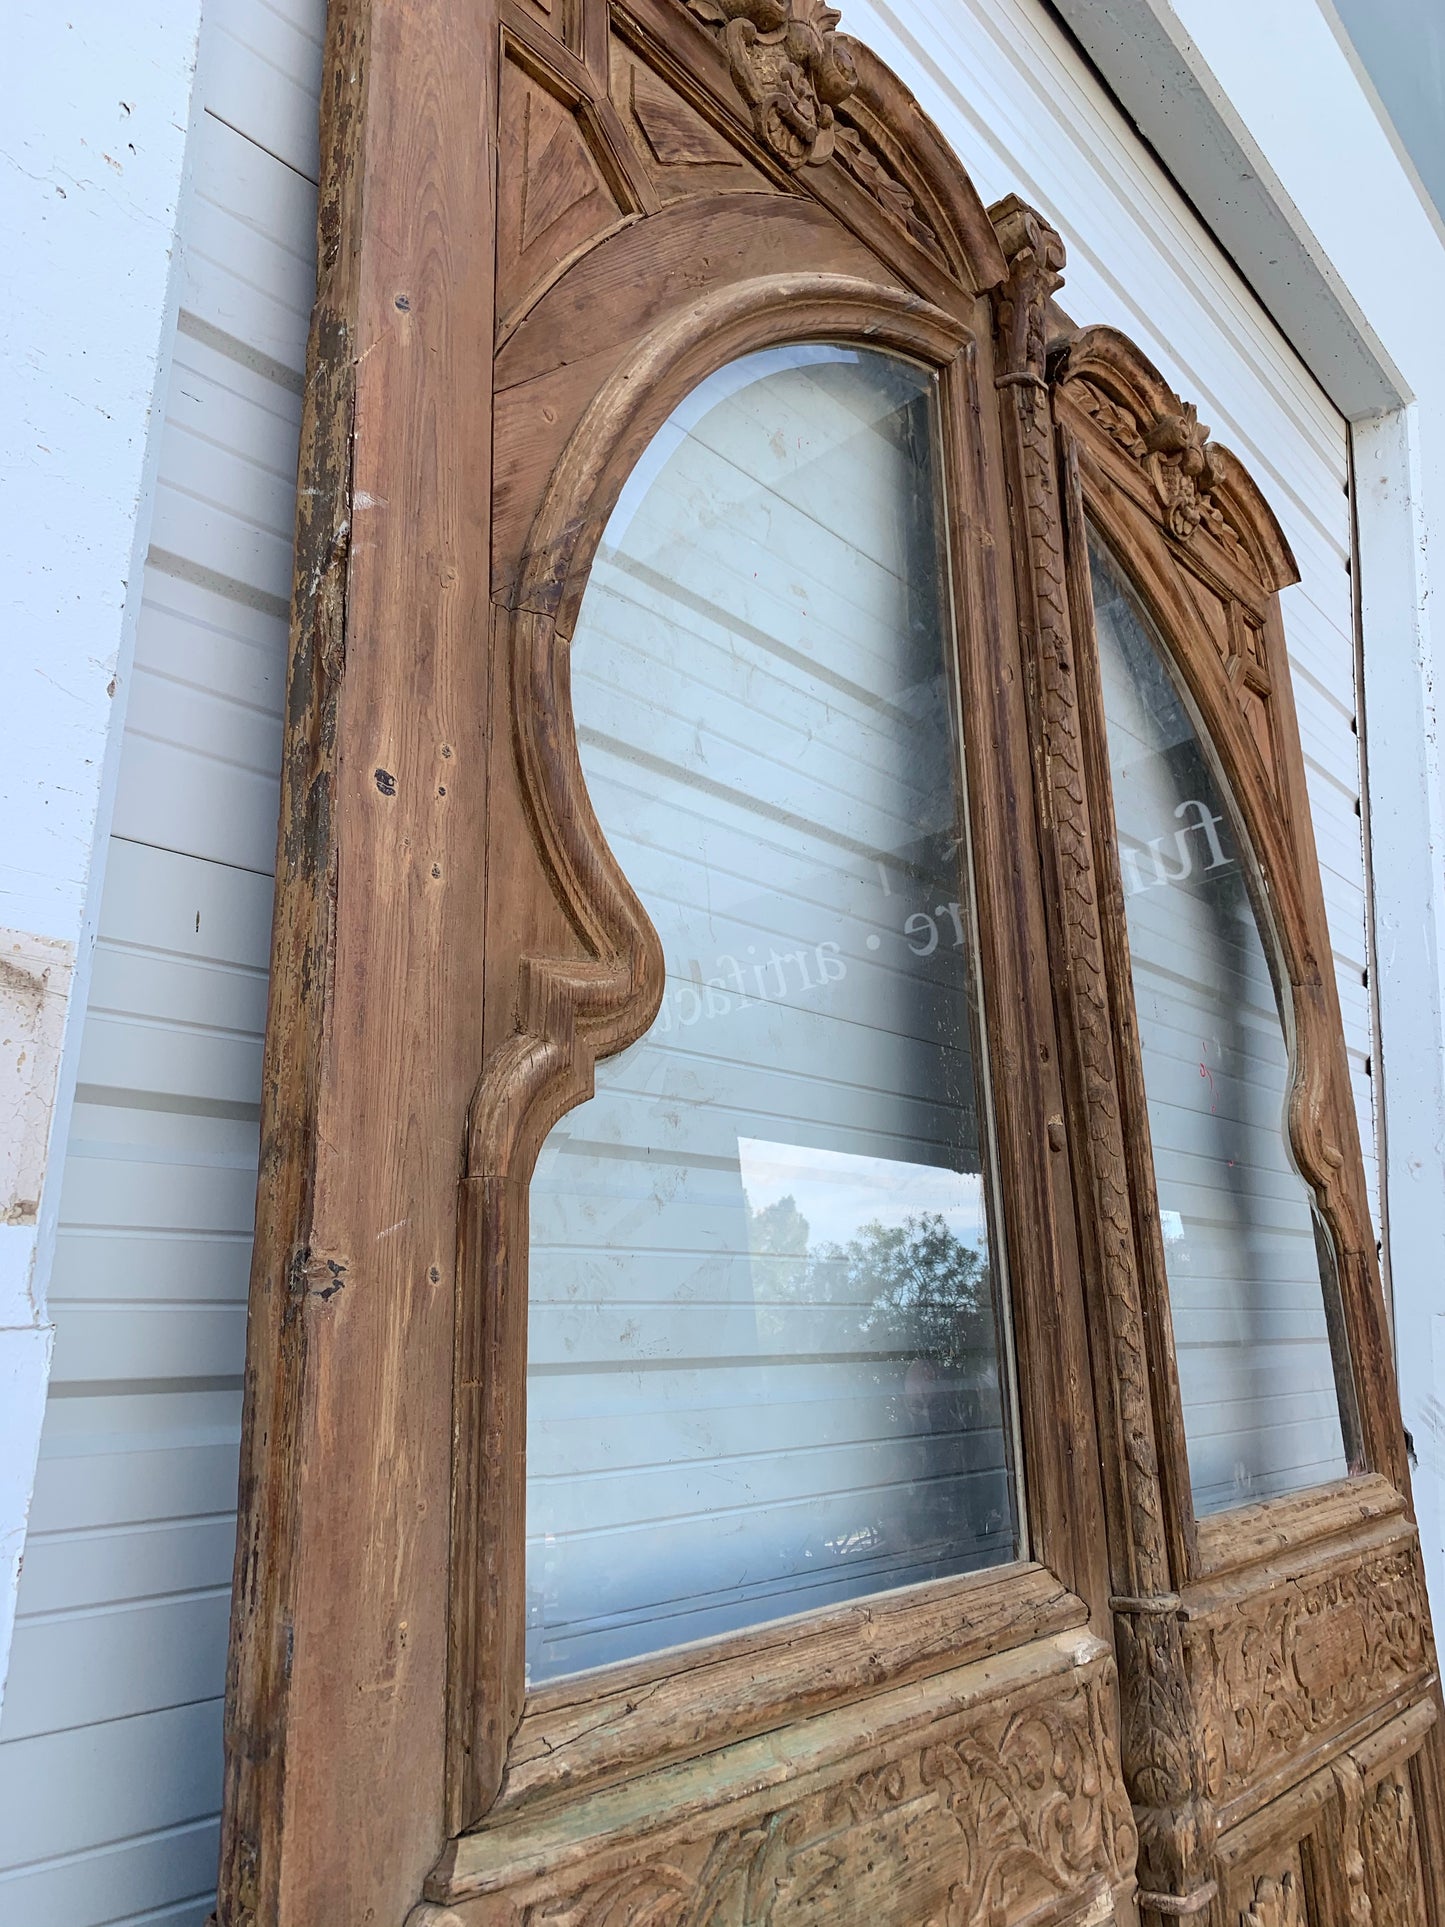 Pair of Wood Carved Antique Doors with Single Lite